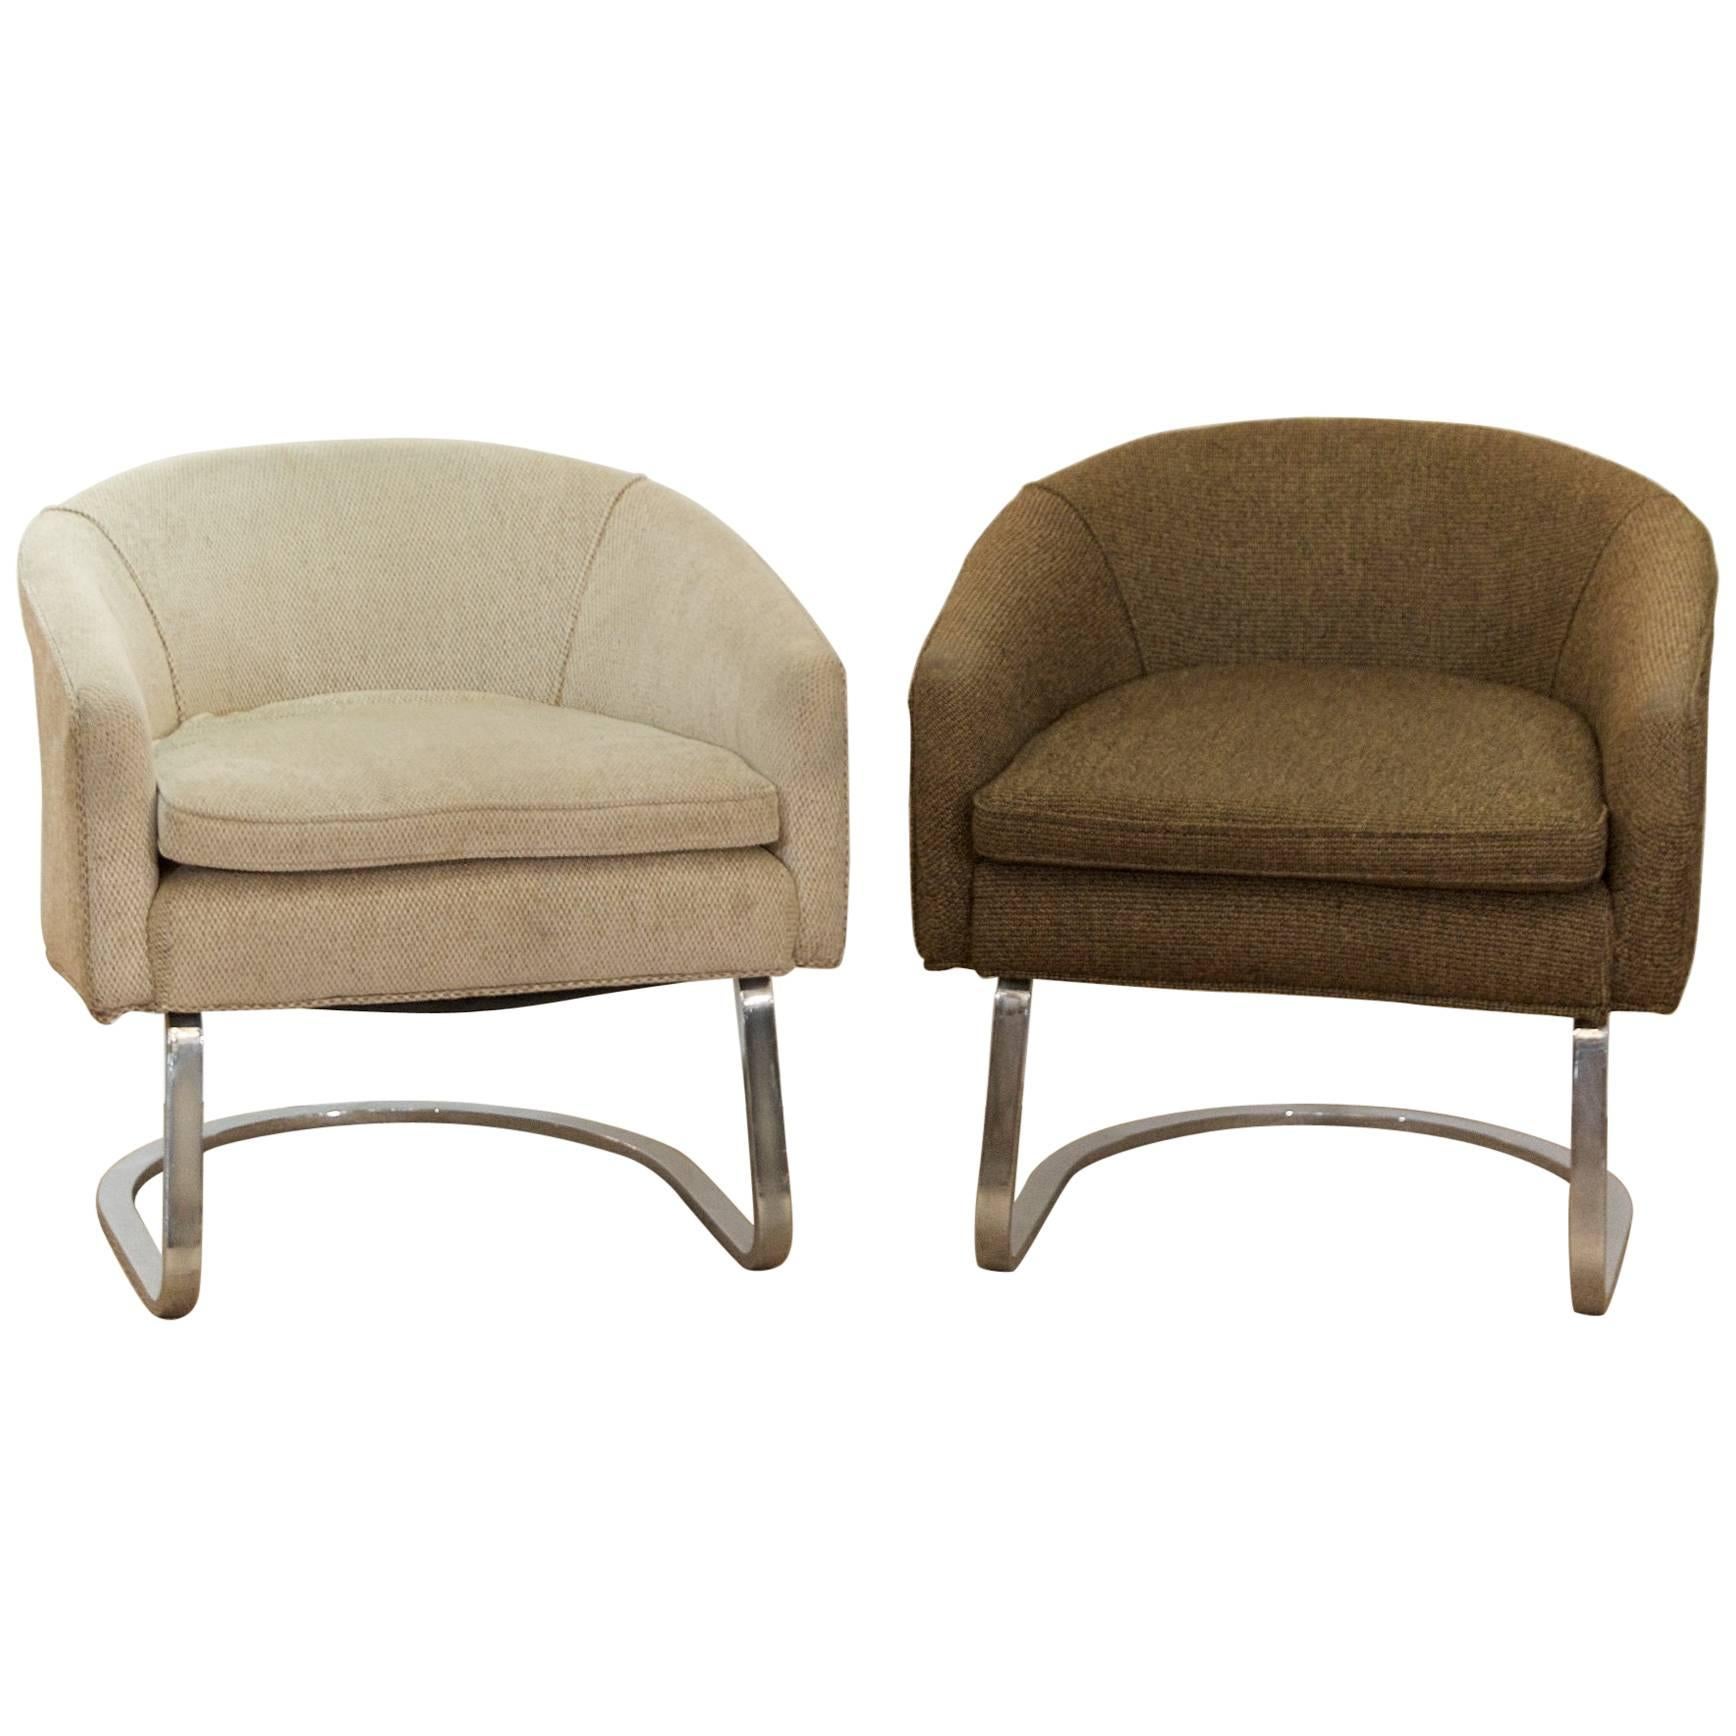 Pair of Milo Baughman Style Cantilever Chairs For Sale